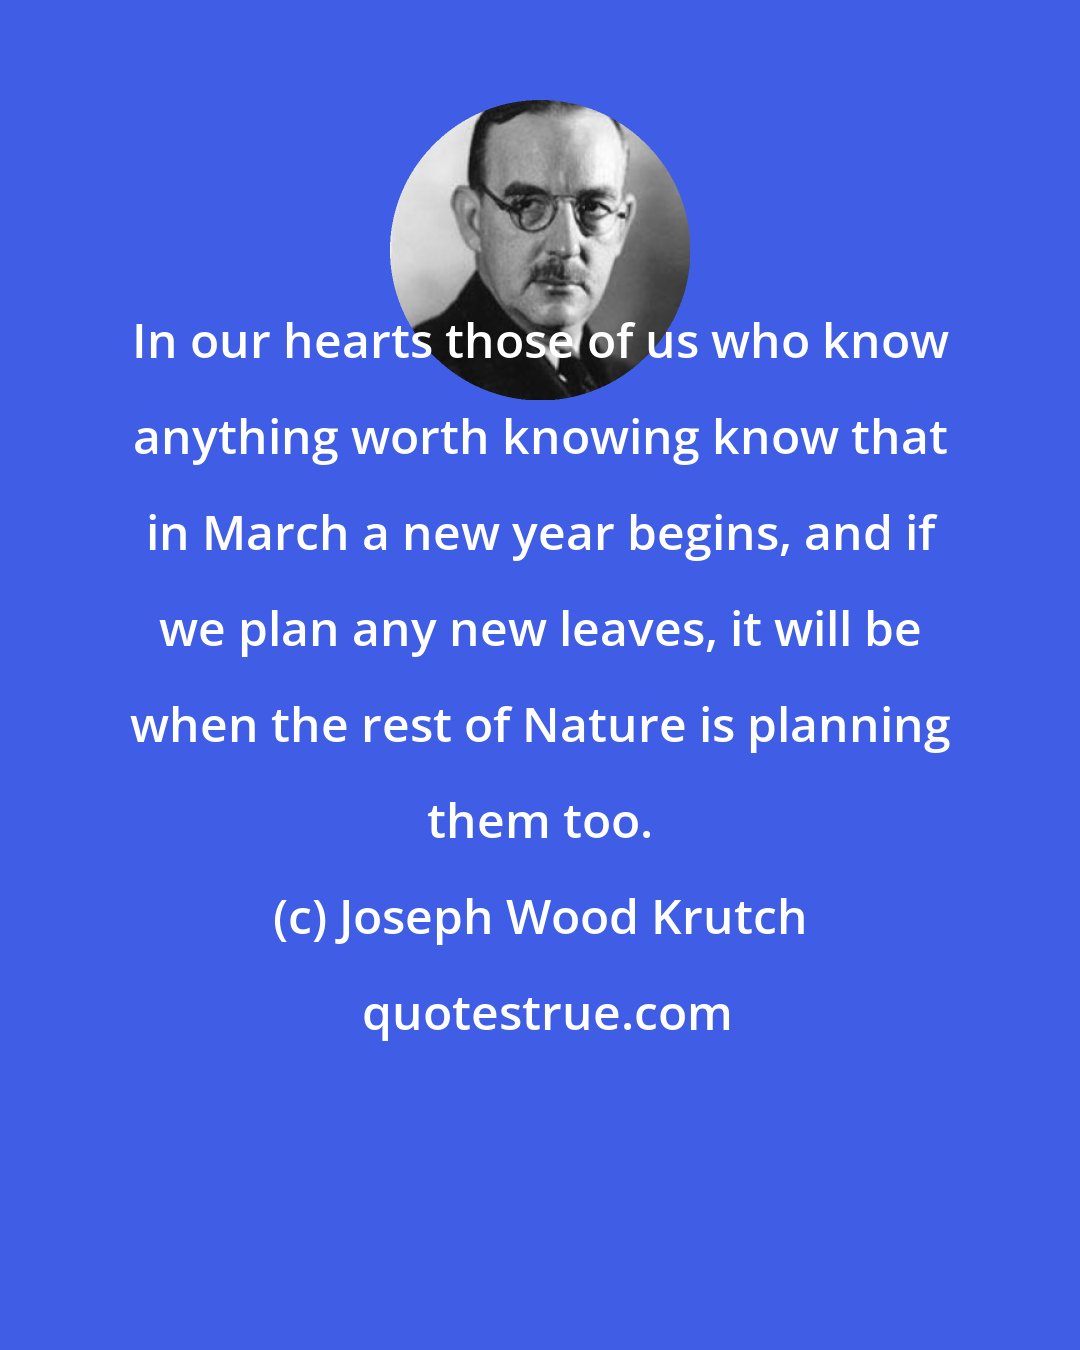 Joseph Wood Krutch: In our hearts those of us who know anything worth knowing know that in March a new year begins, and if we plan any new leaves, it will be when the rest of Nature is planning them too.